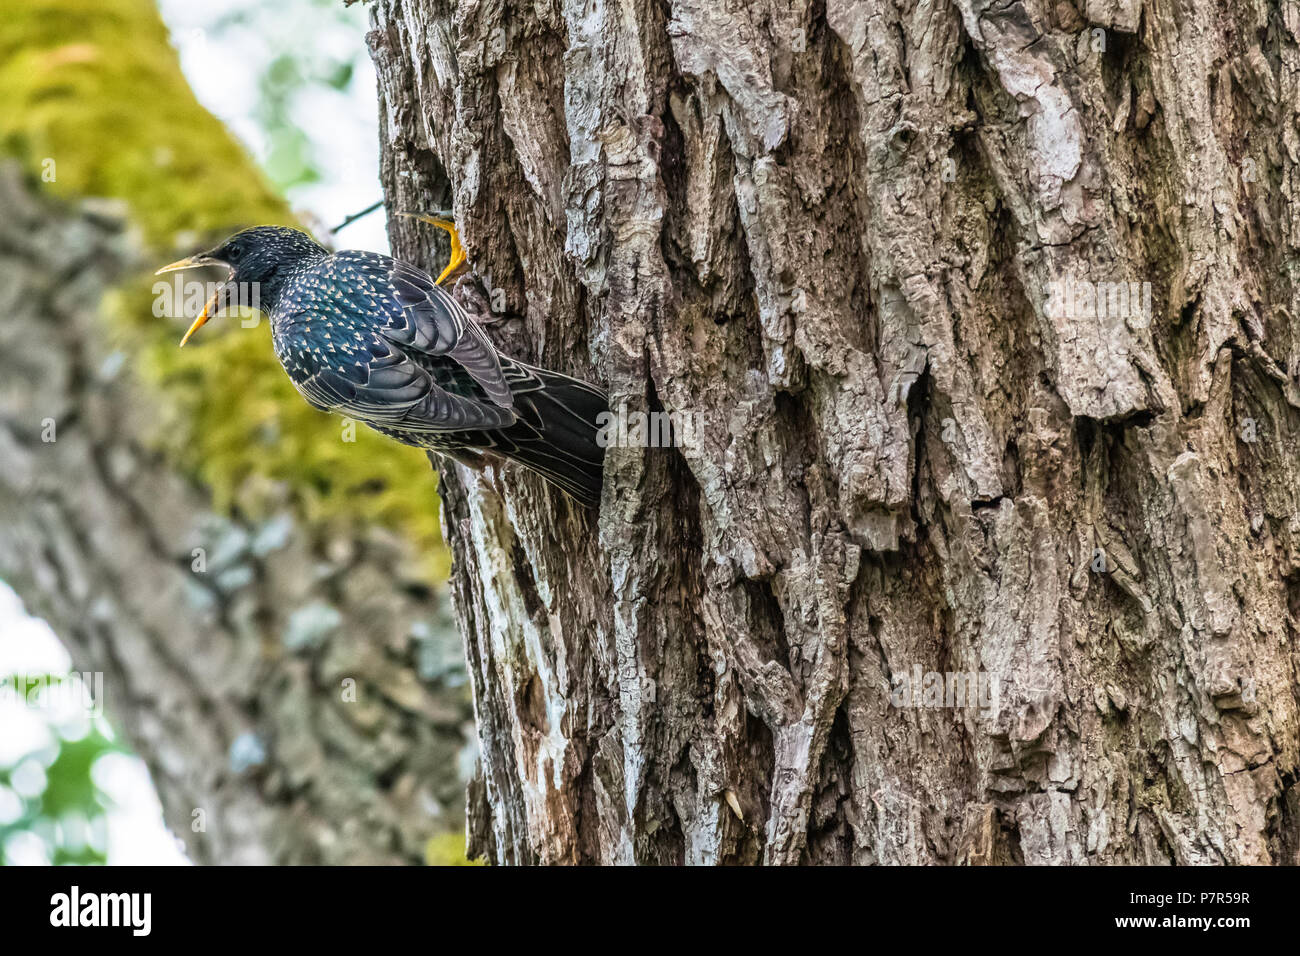 The parent of a common starling feeding a chick in a nest in a tree hole. Also known as Sturnus vulgaris or European starling. Stock Photo